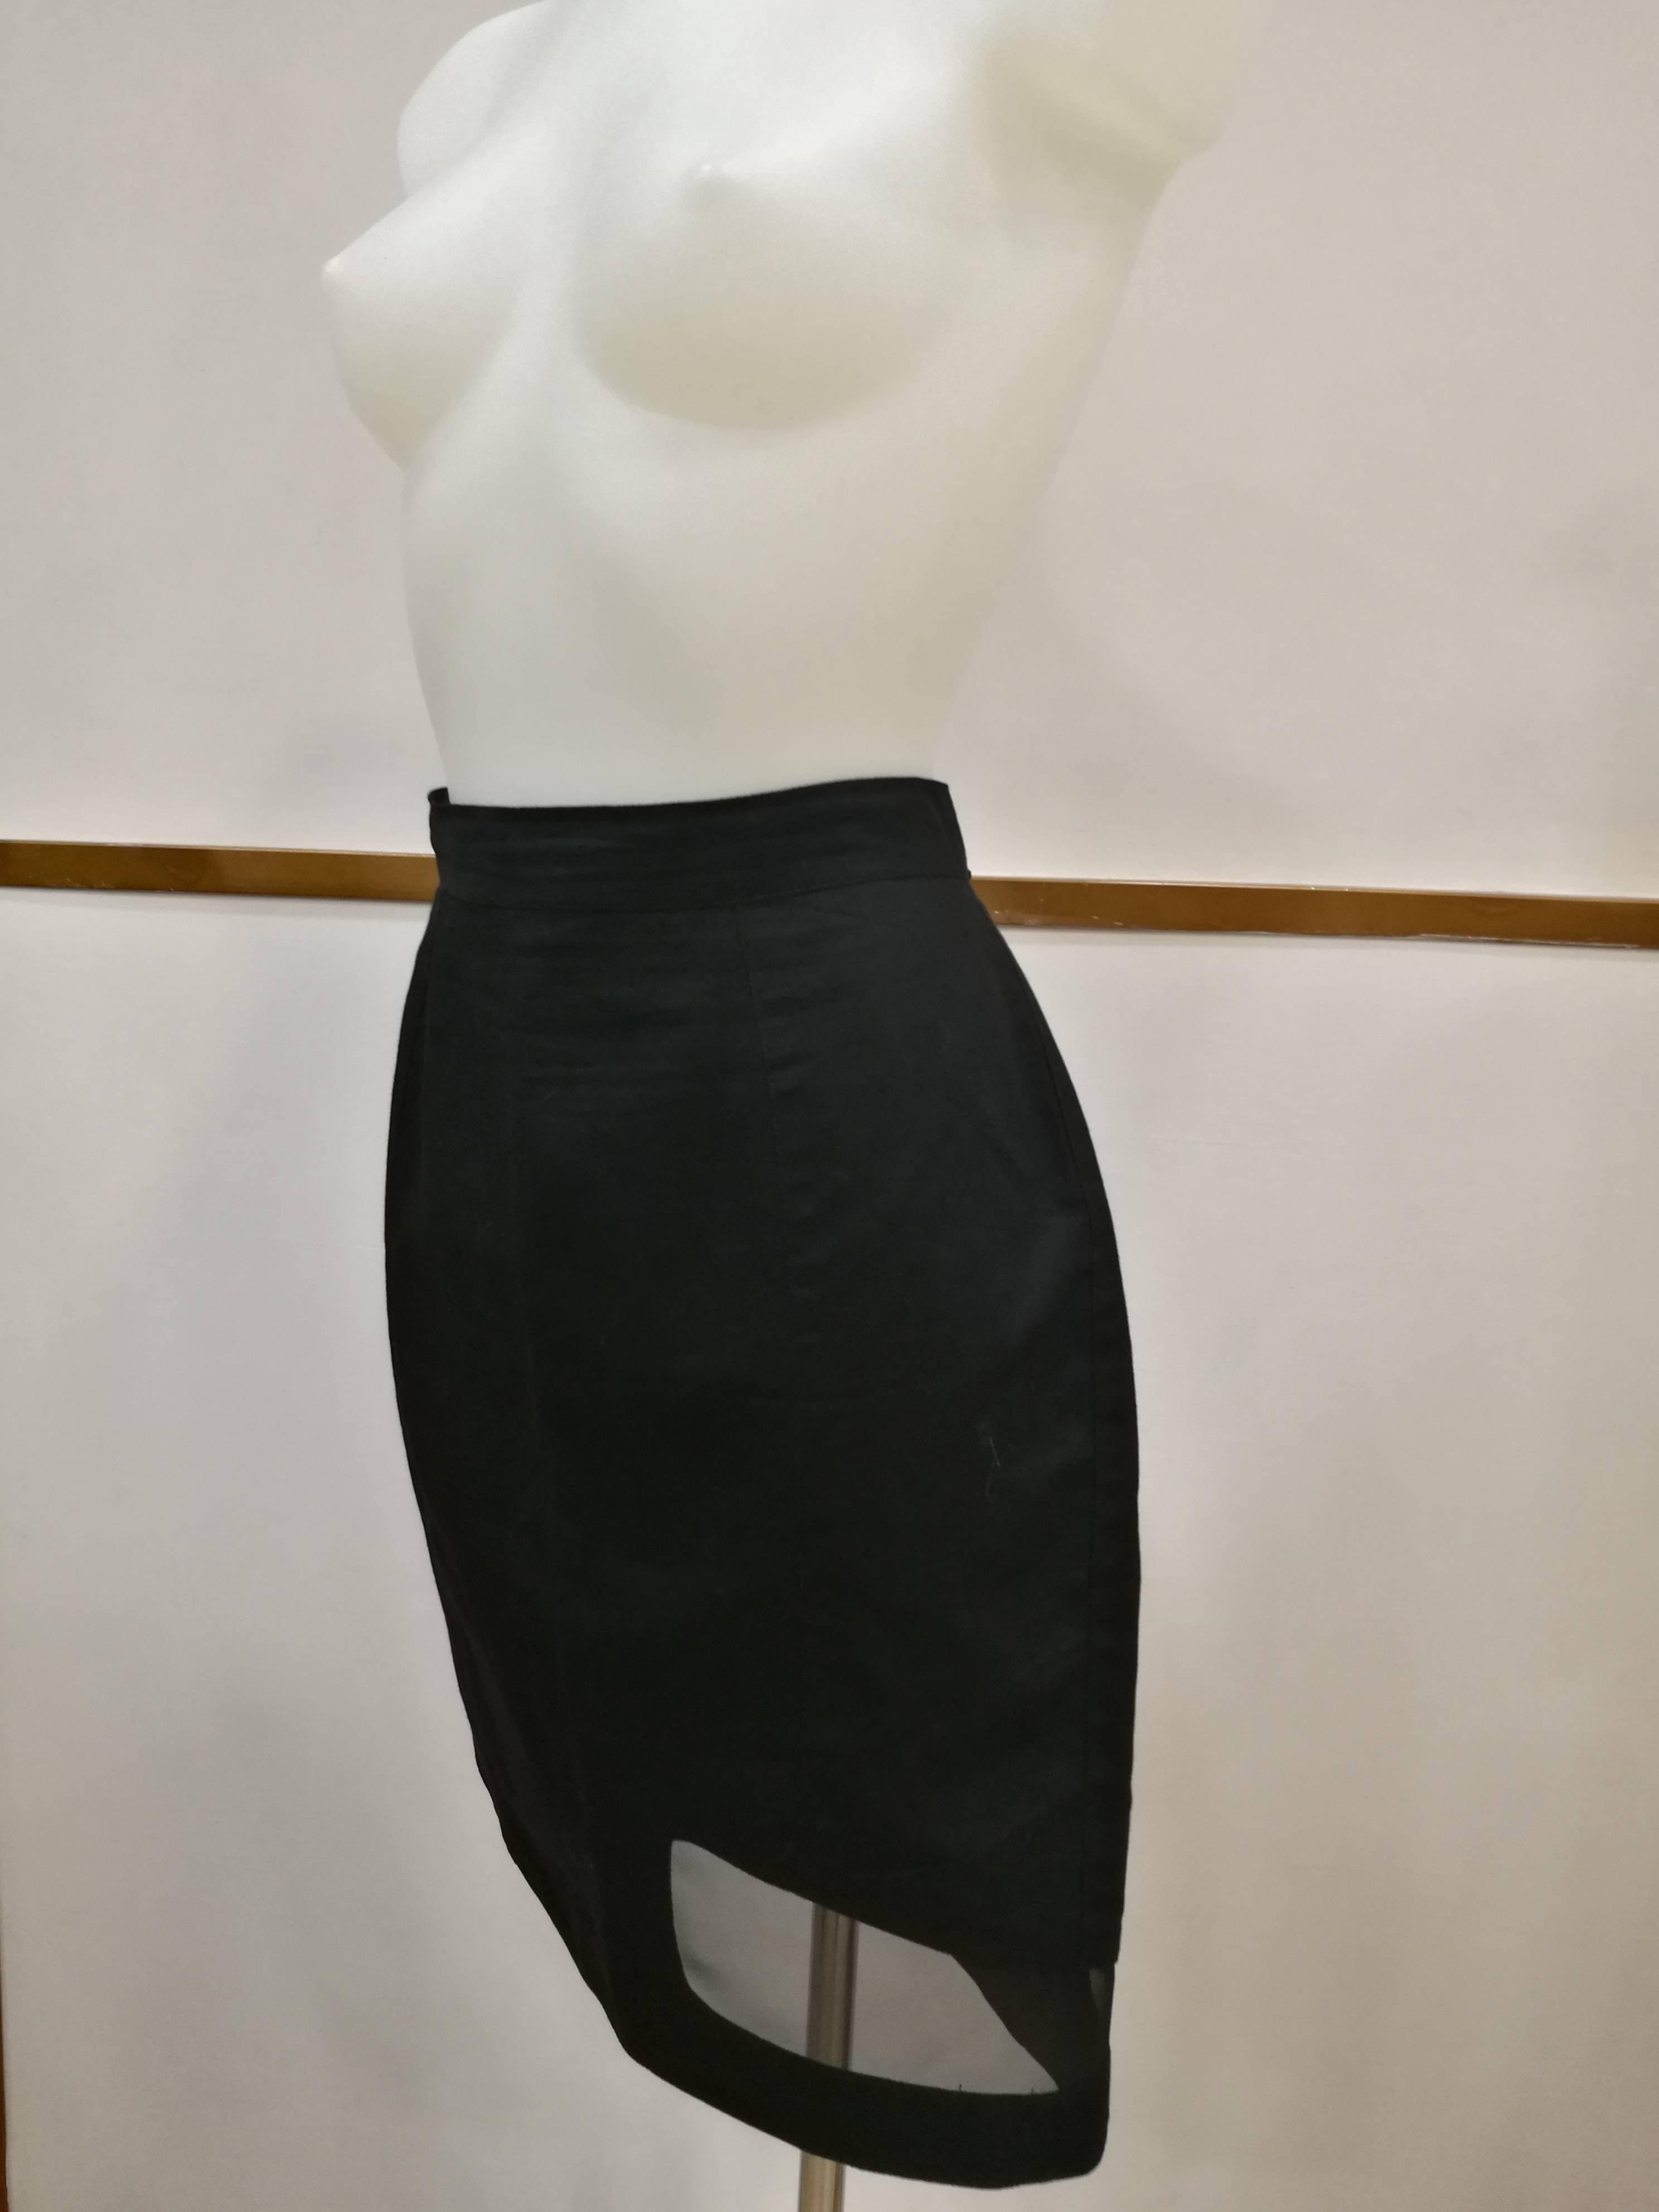 Thierry Mugler Activ Linen Black Skirt with Net
totally made in italy in italian size range 46
Composition: 55 linen 40 cotton 5 nylon